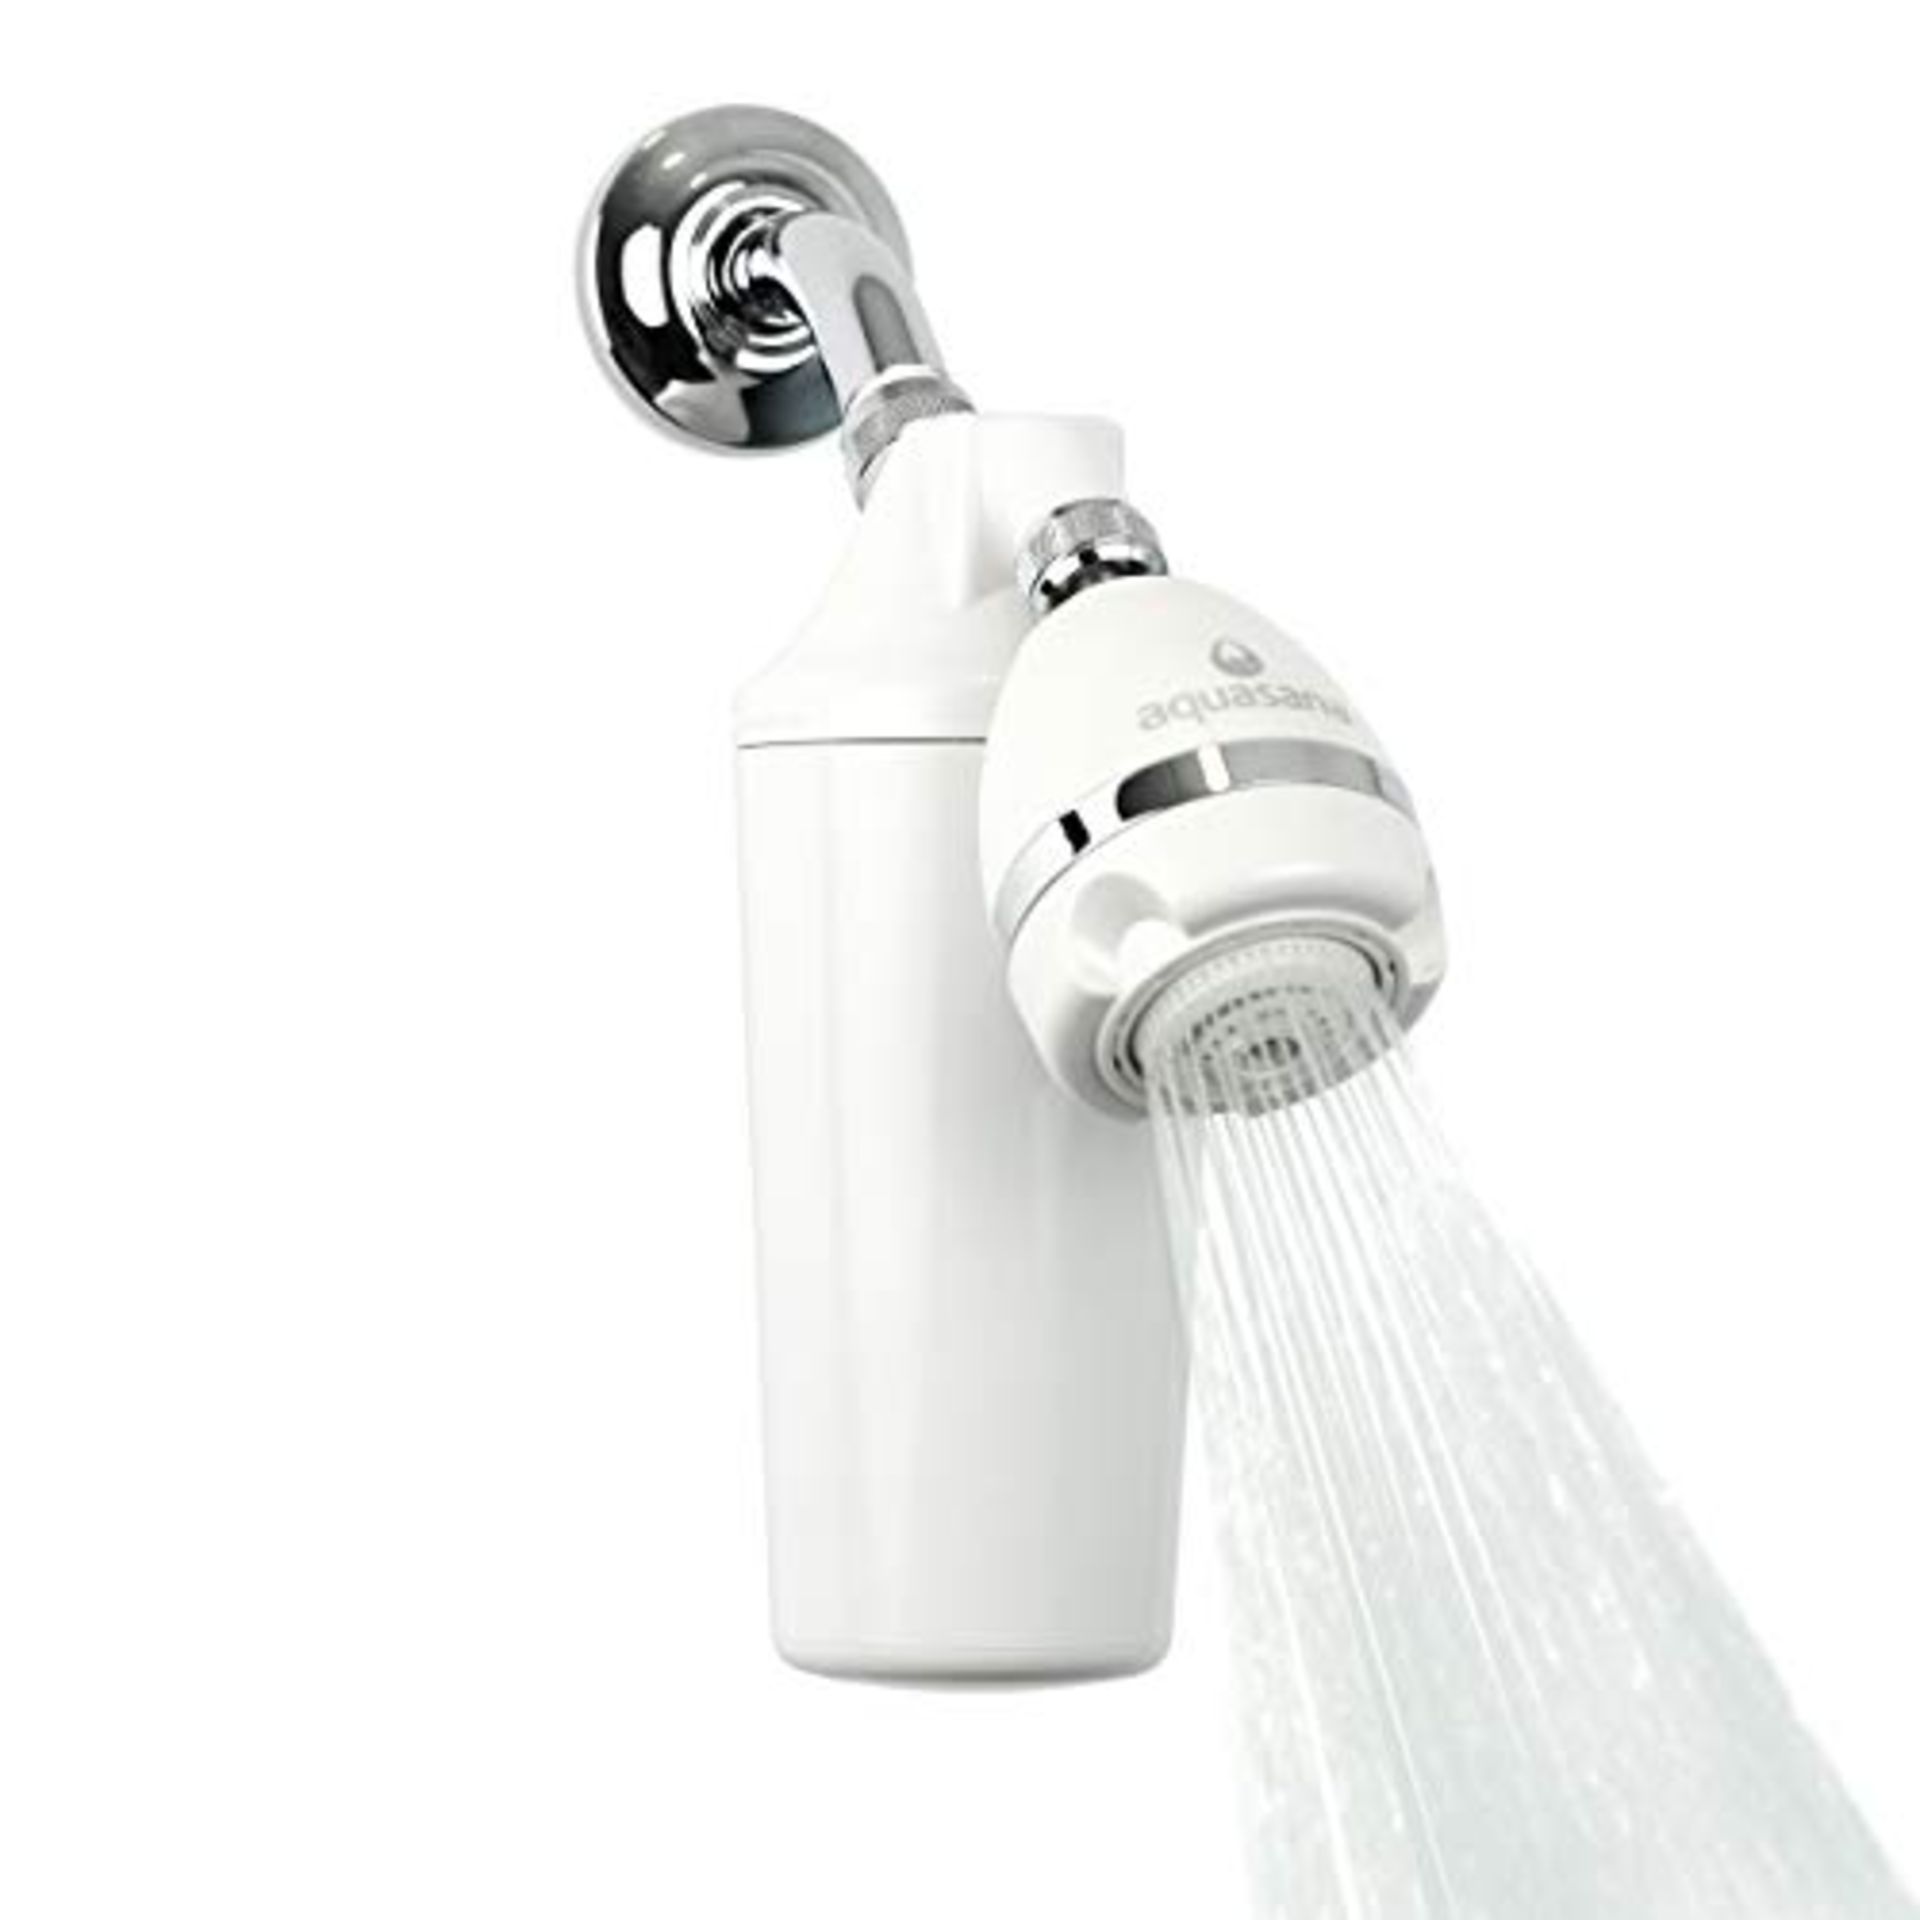 RRP £82.00 Aquasana AQ-4100 Deluxe Shower Water Filter System with Adjustable Showerhead, White